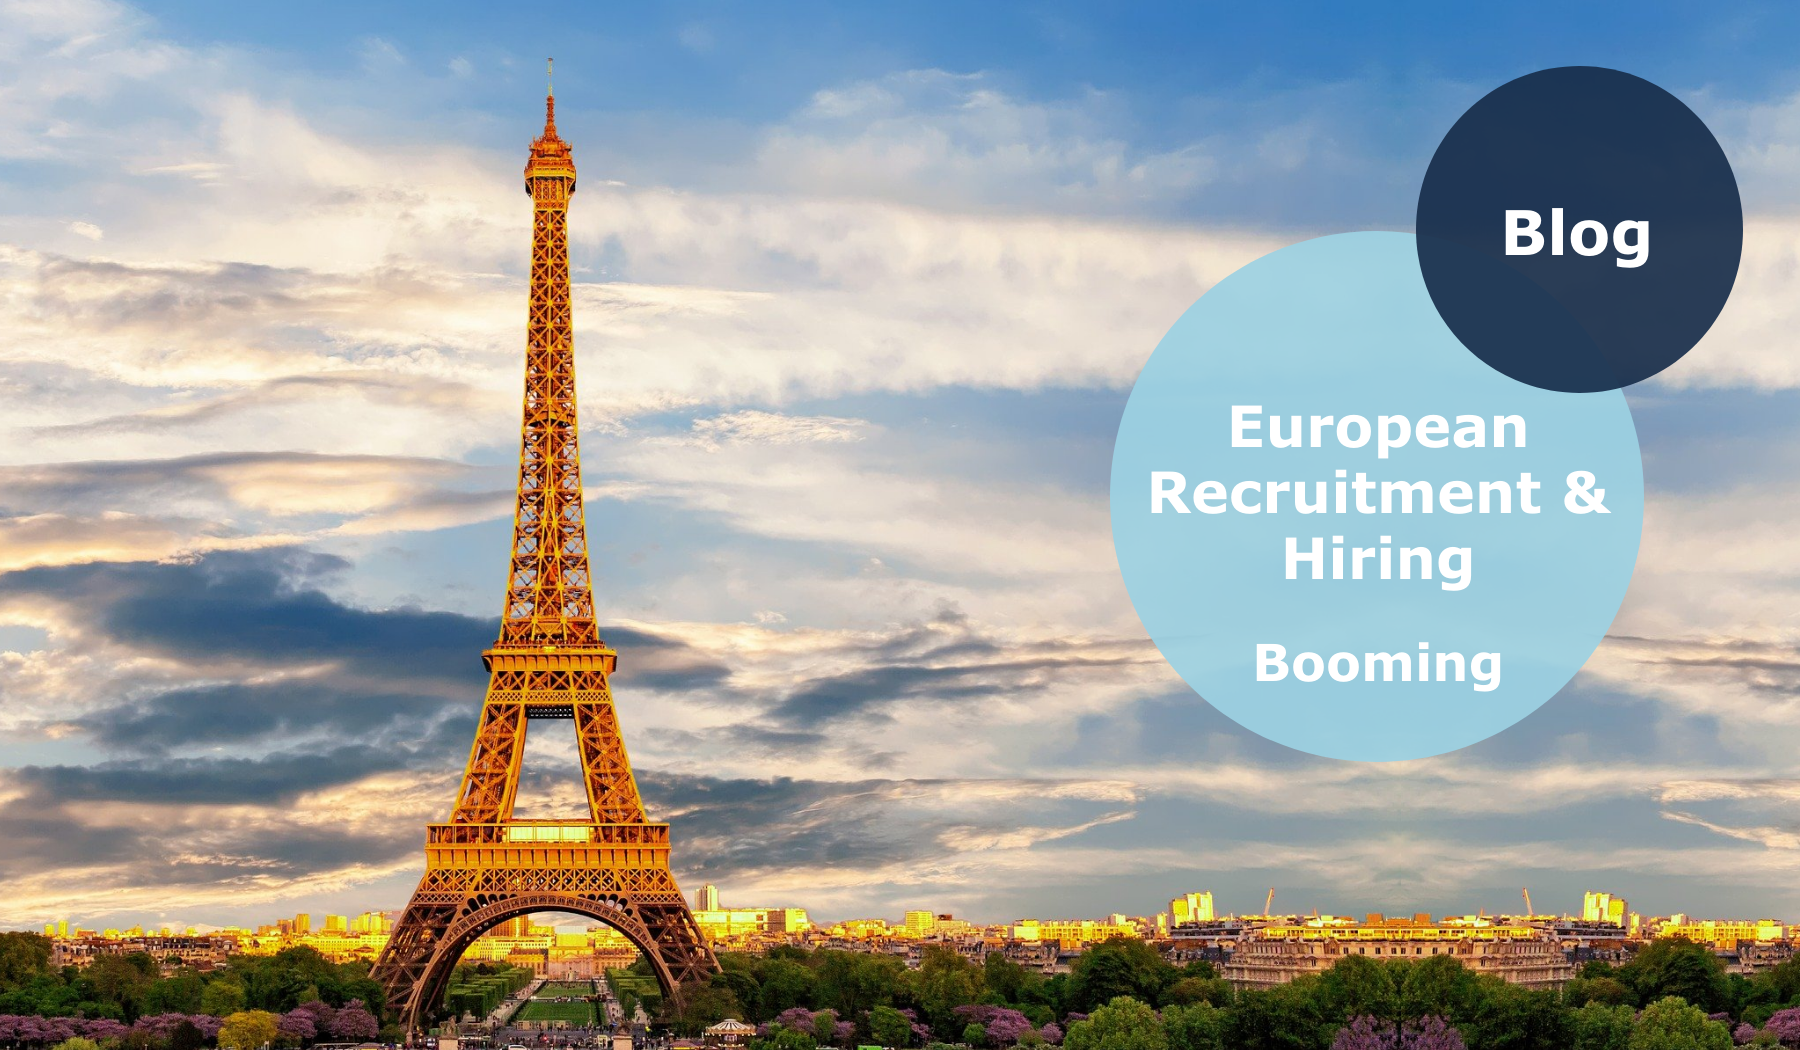 European recruitment and hiring is booming